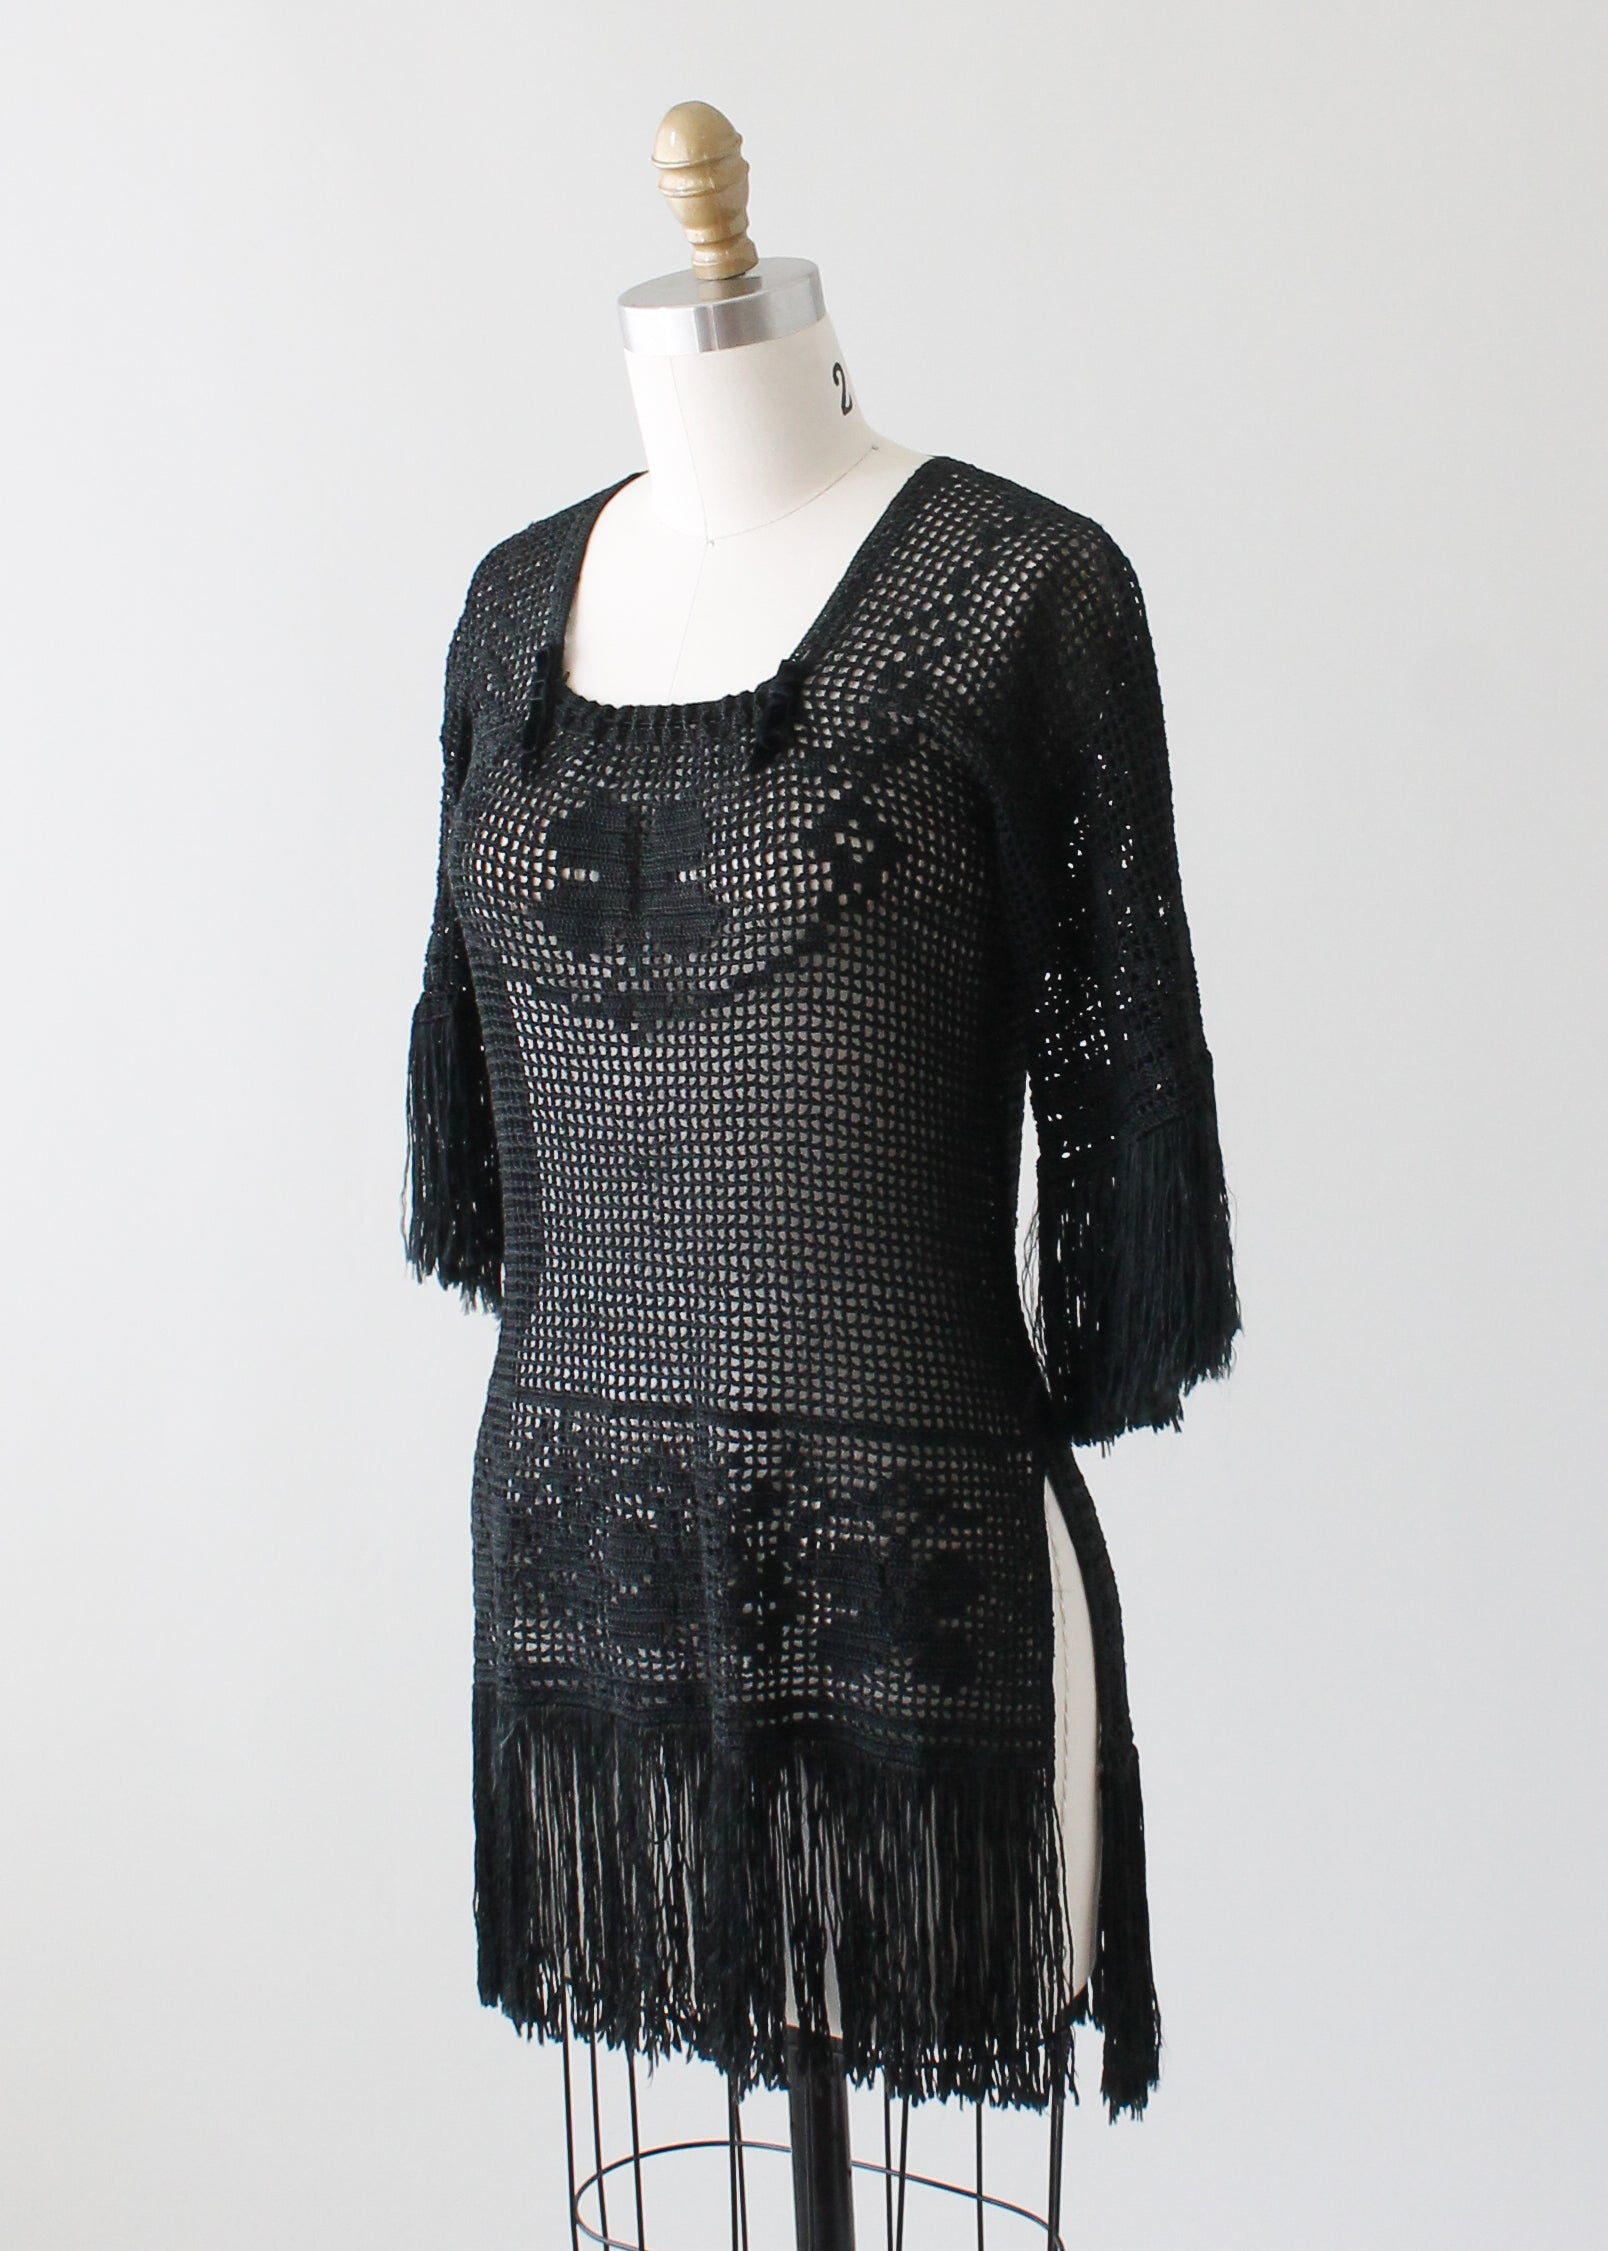 Vintage 1920s Fringed Knit Tunic Sweater - Raleigh Vintage